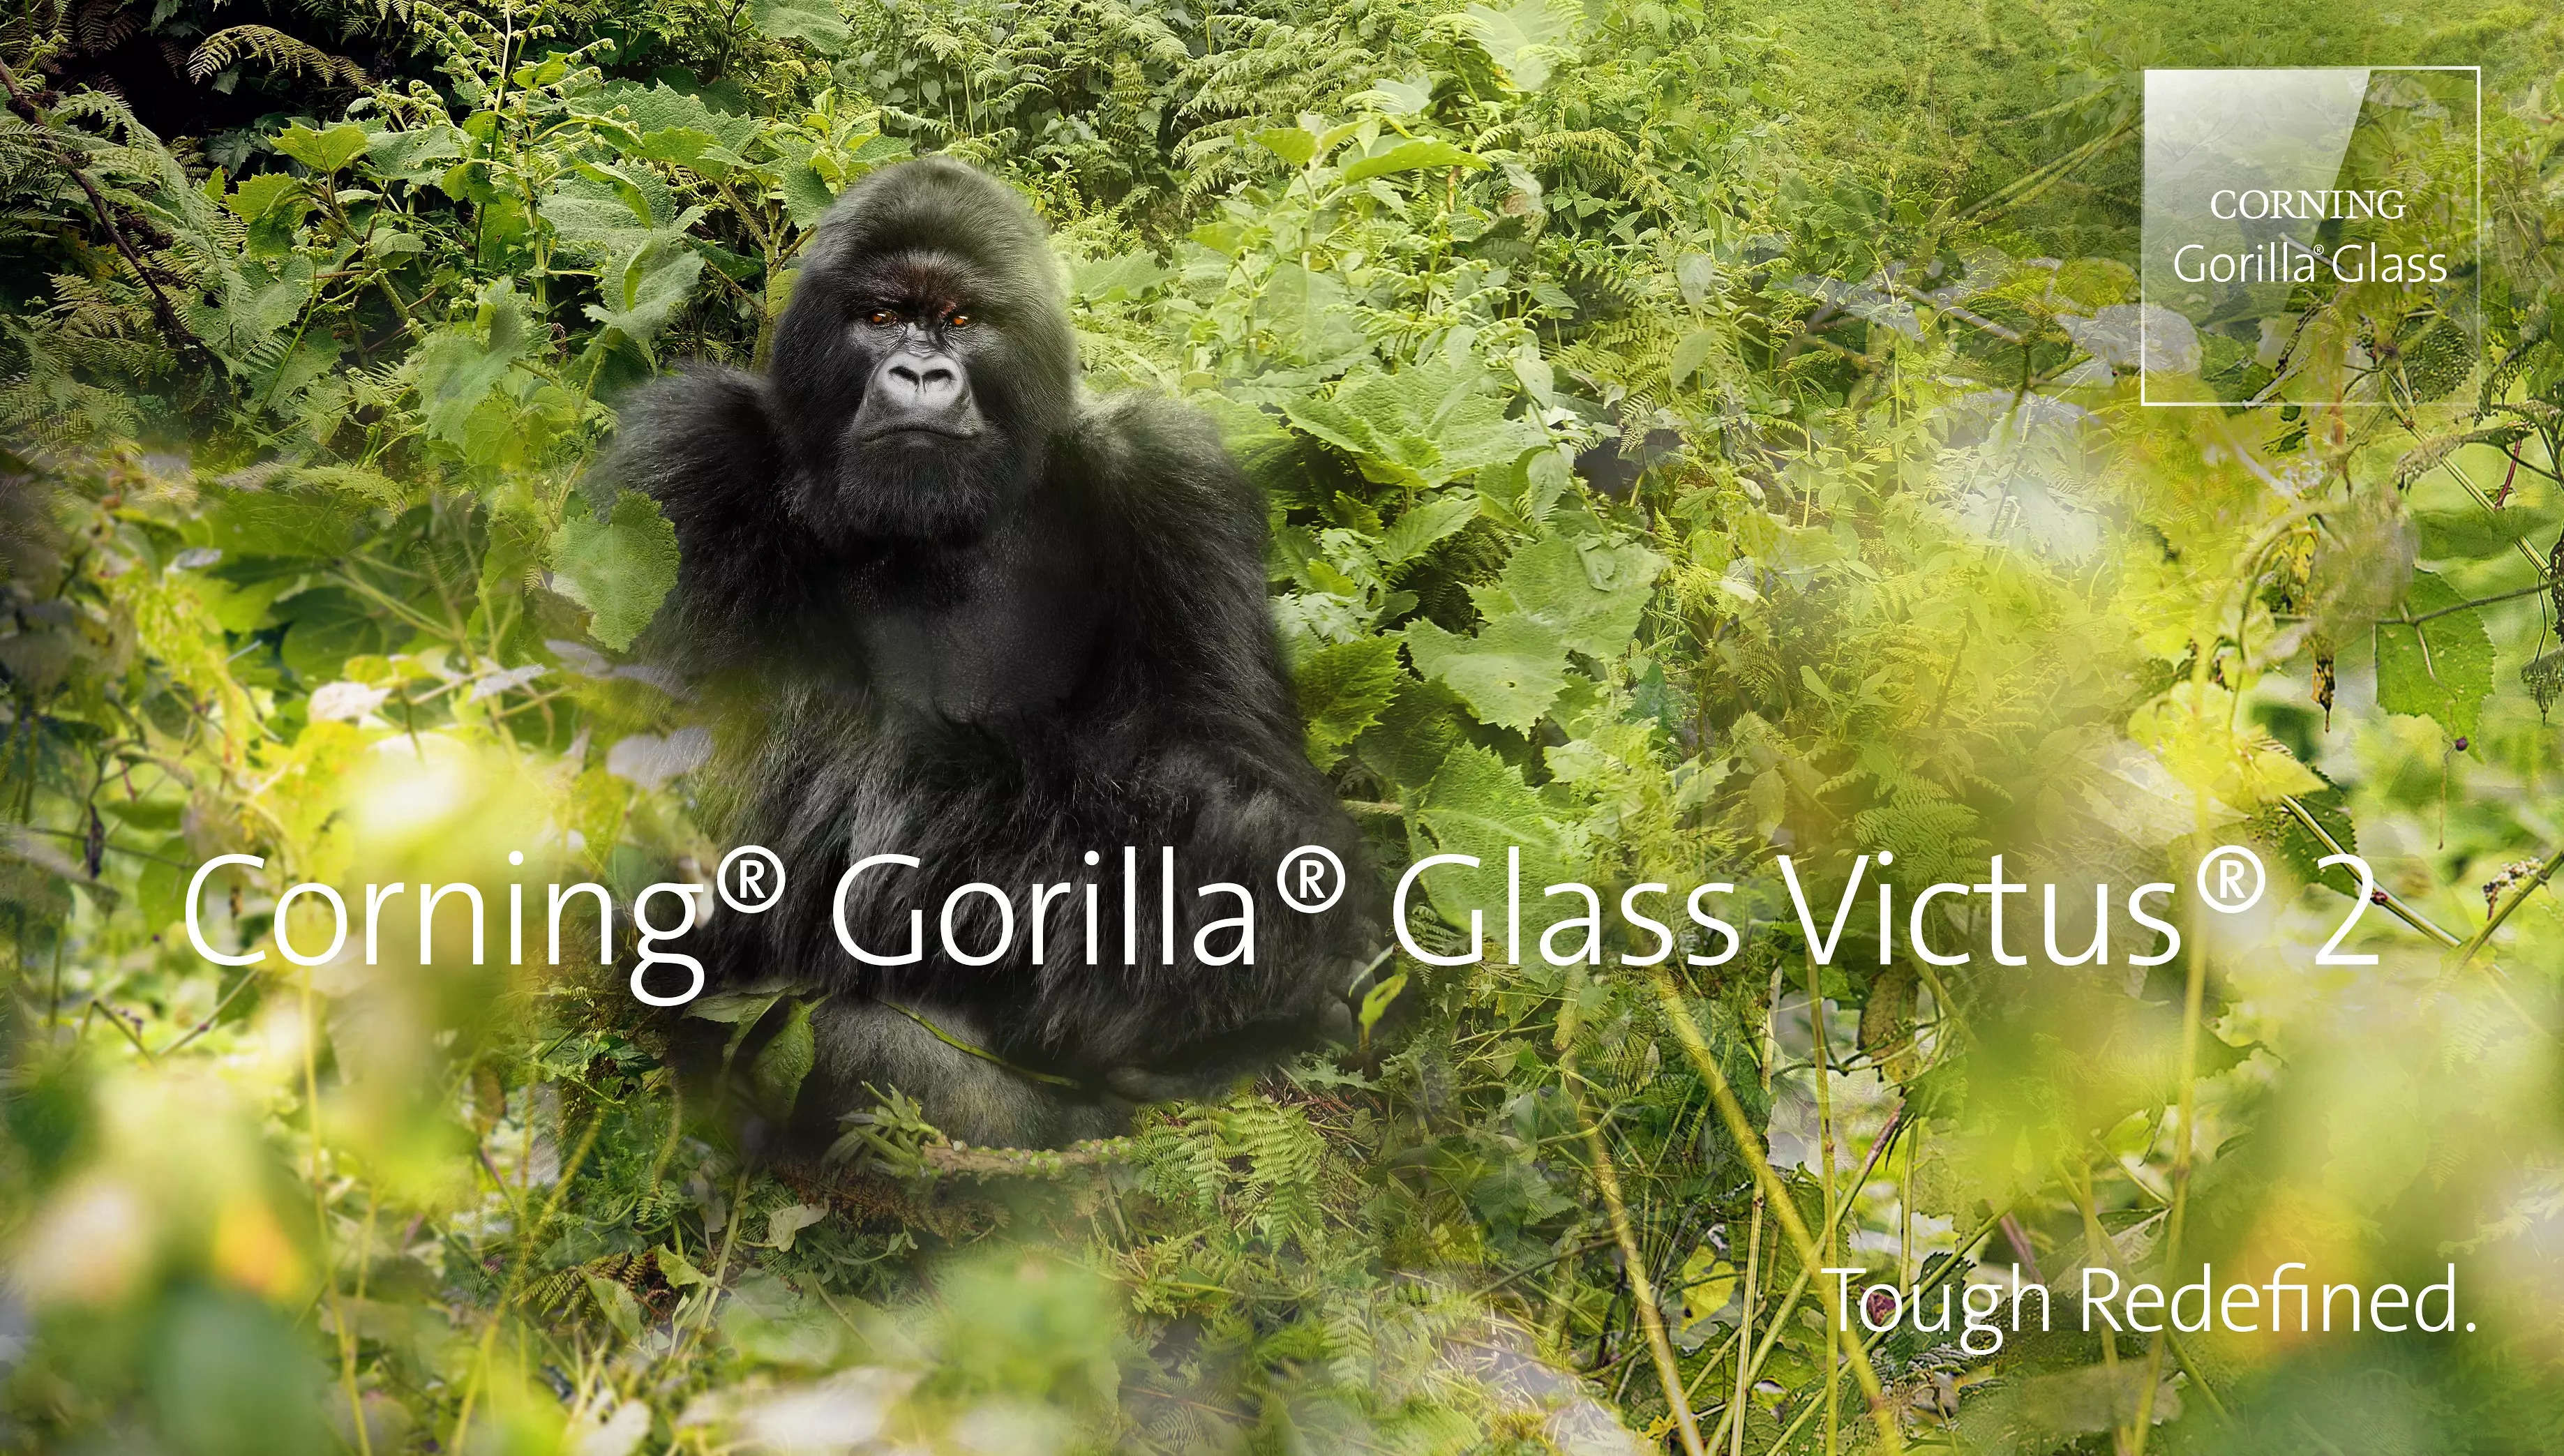 Corning launches Gorilla Glass Victus 2 with improved drop performance